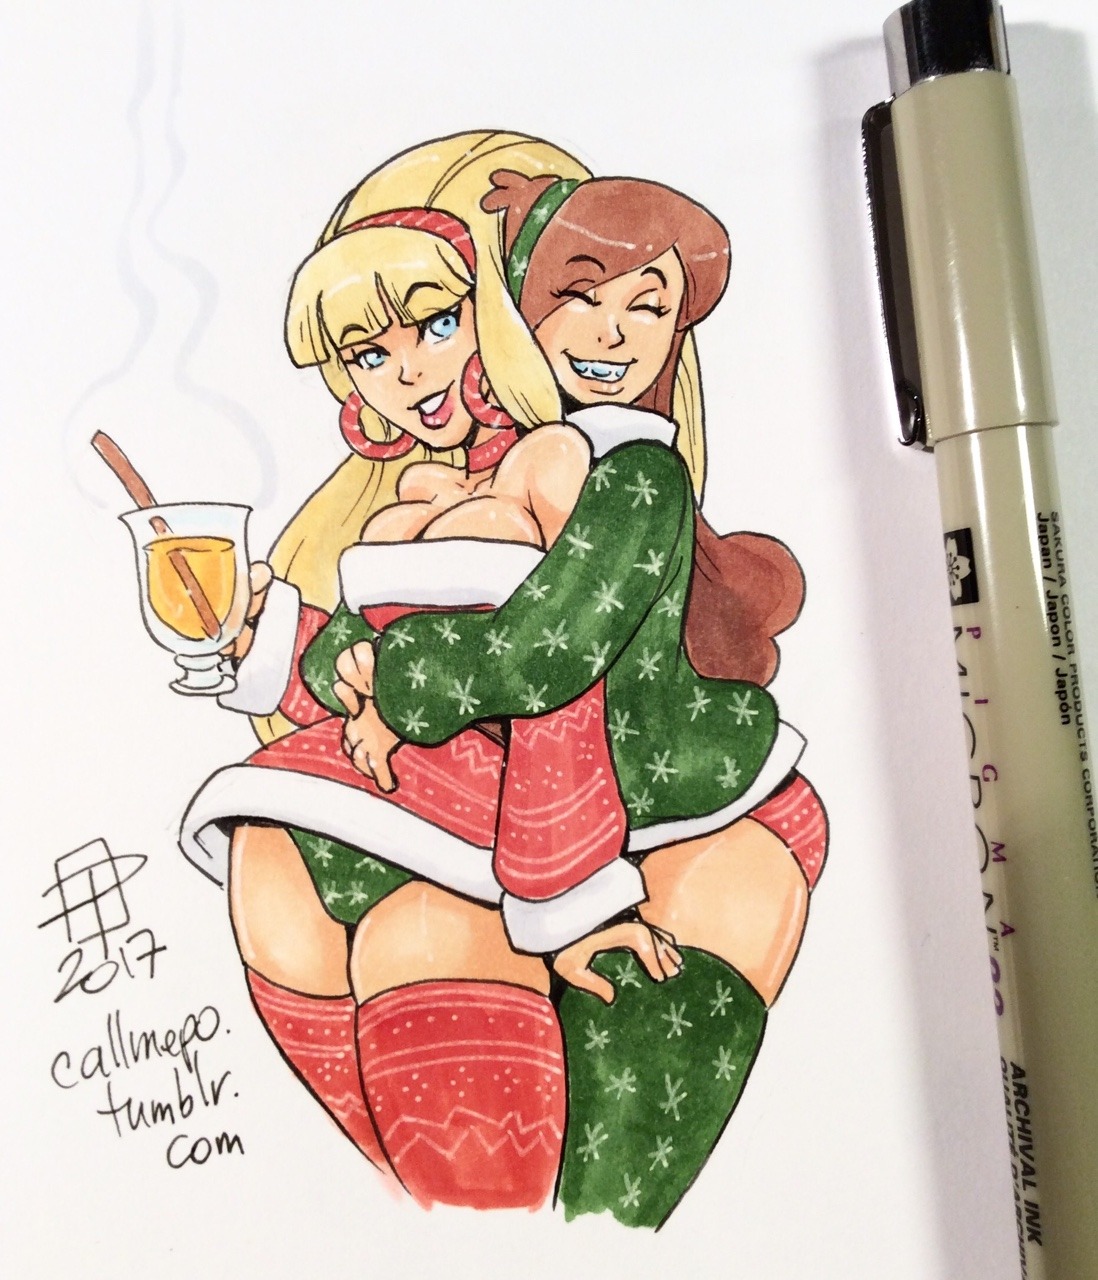 chillguydraws: callmepo:   Hot apple cider and a warm hug…  Tiny doodle of Holiday